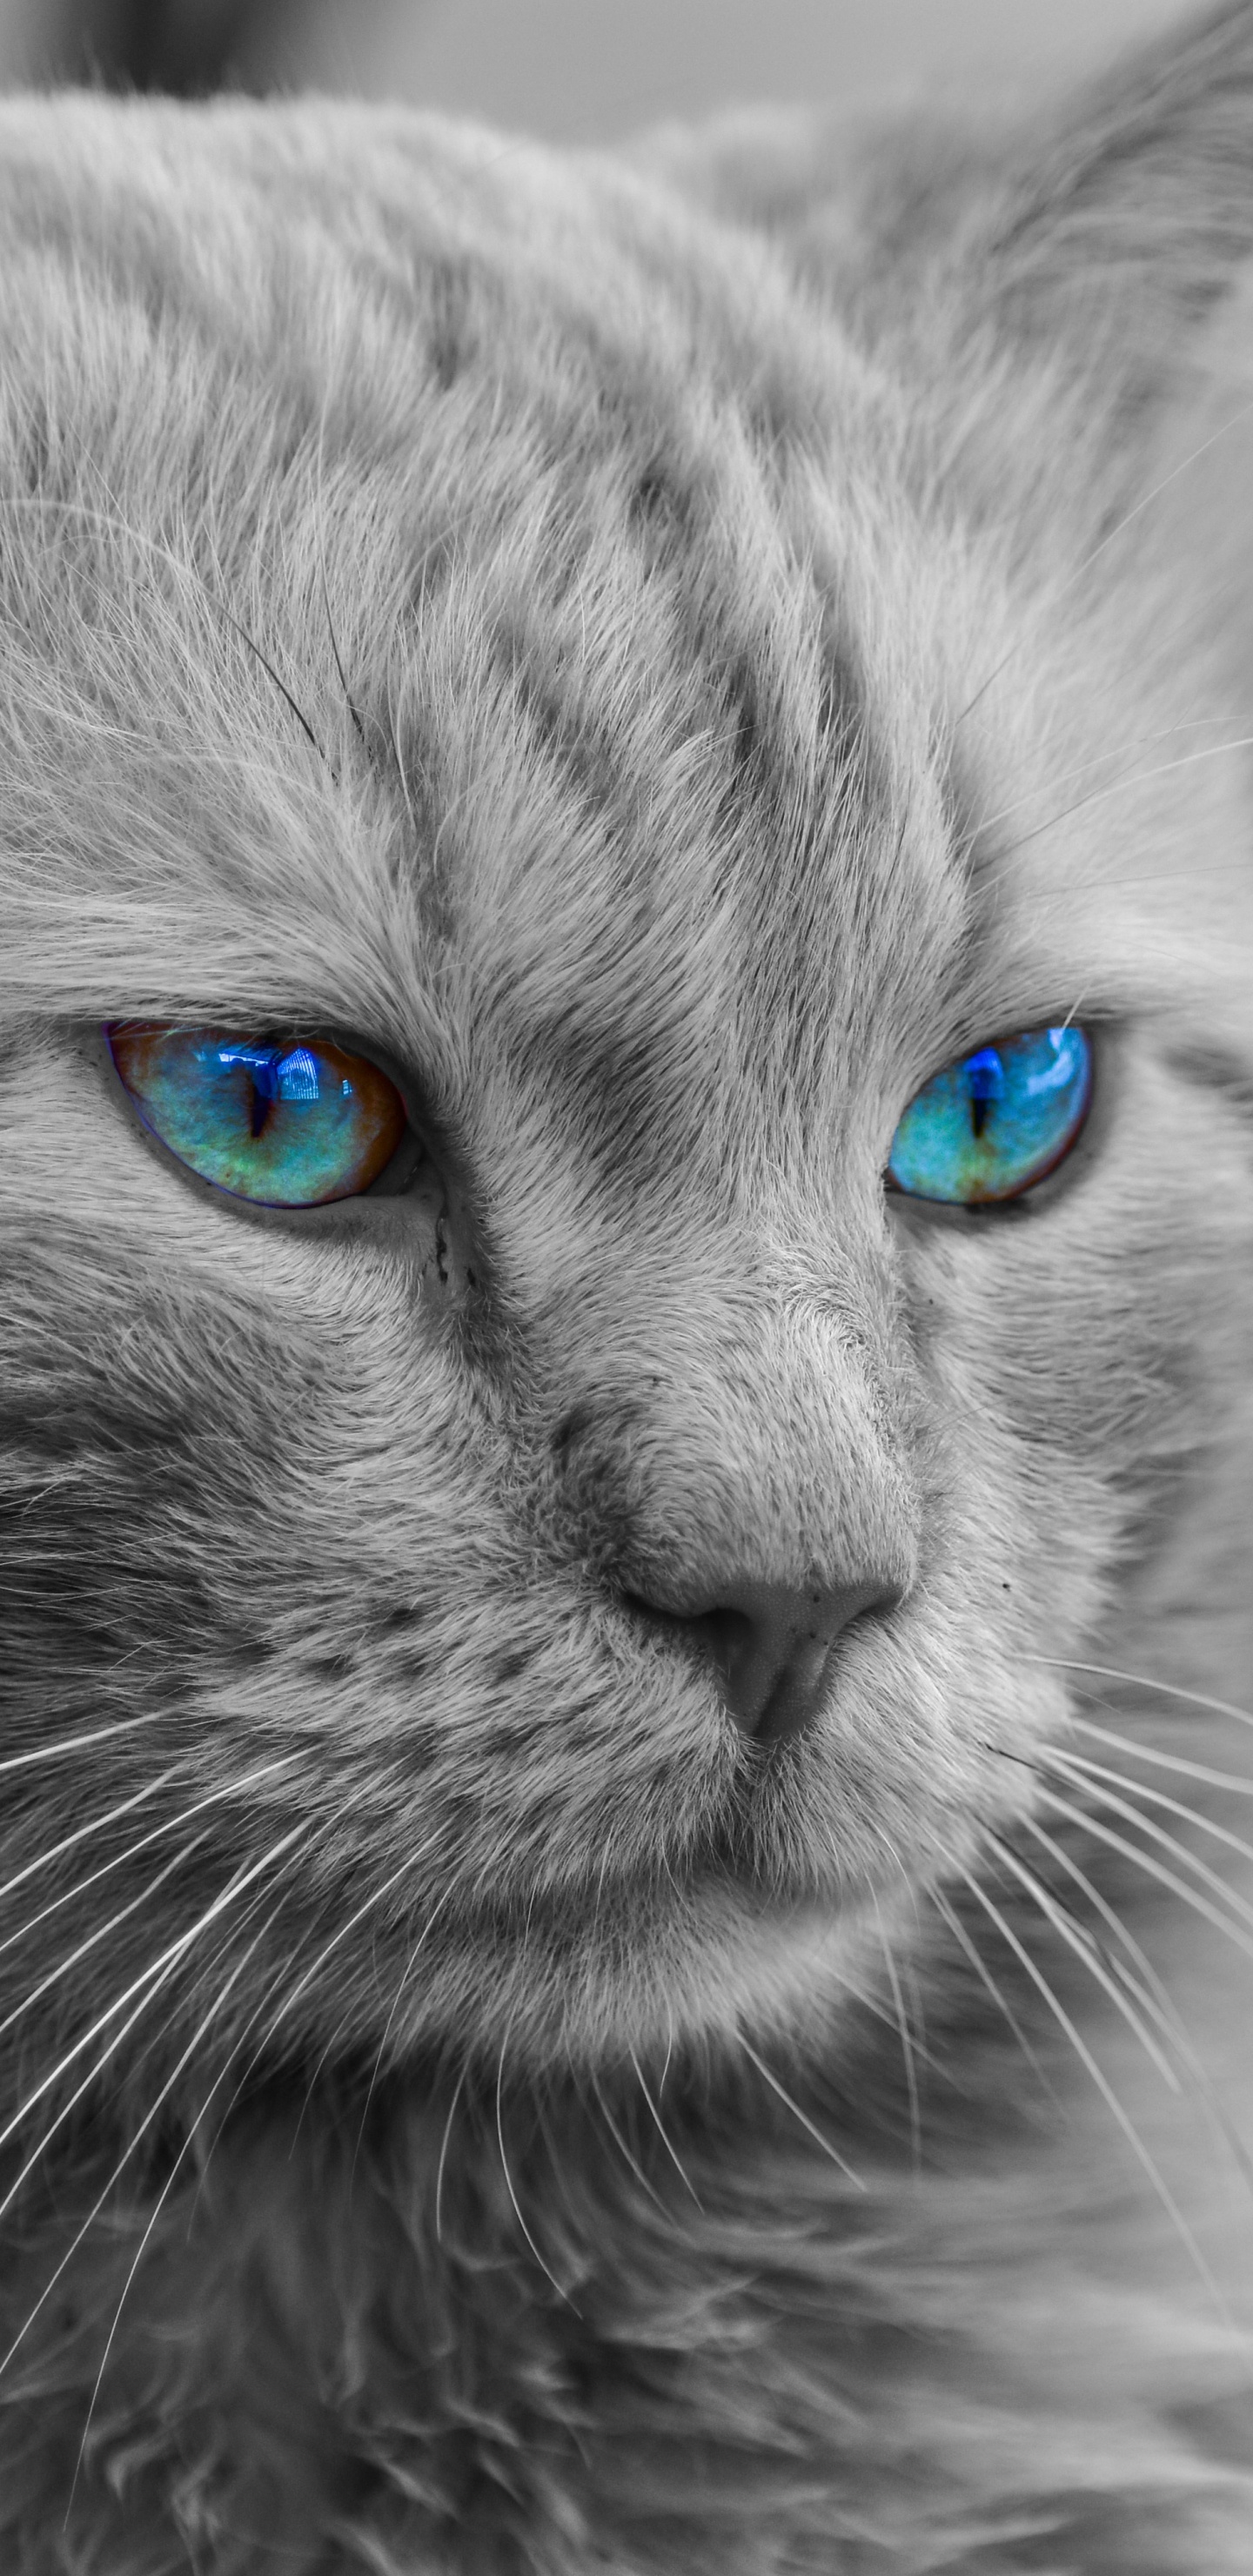 Grayscale Photo of Cat With Blue Eyes. Wallpaper in 1440x2960 Resolution